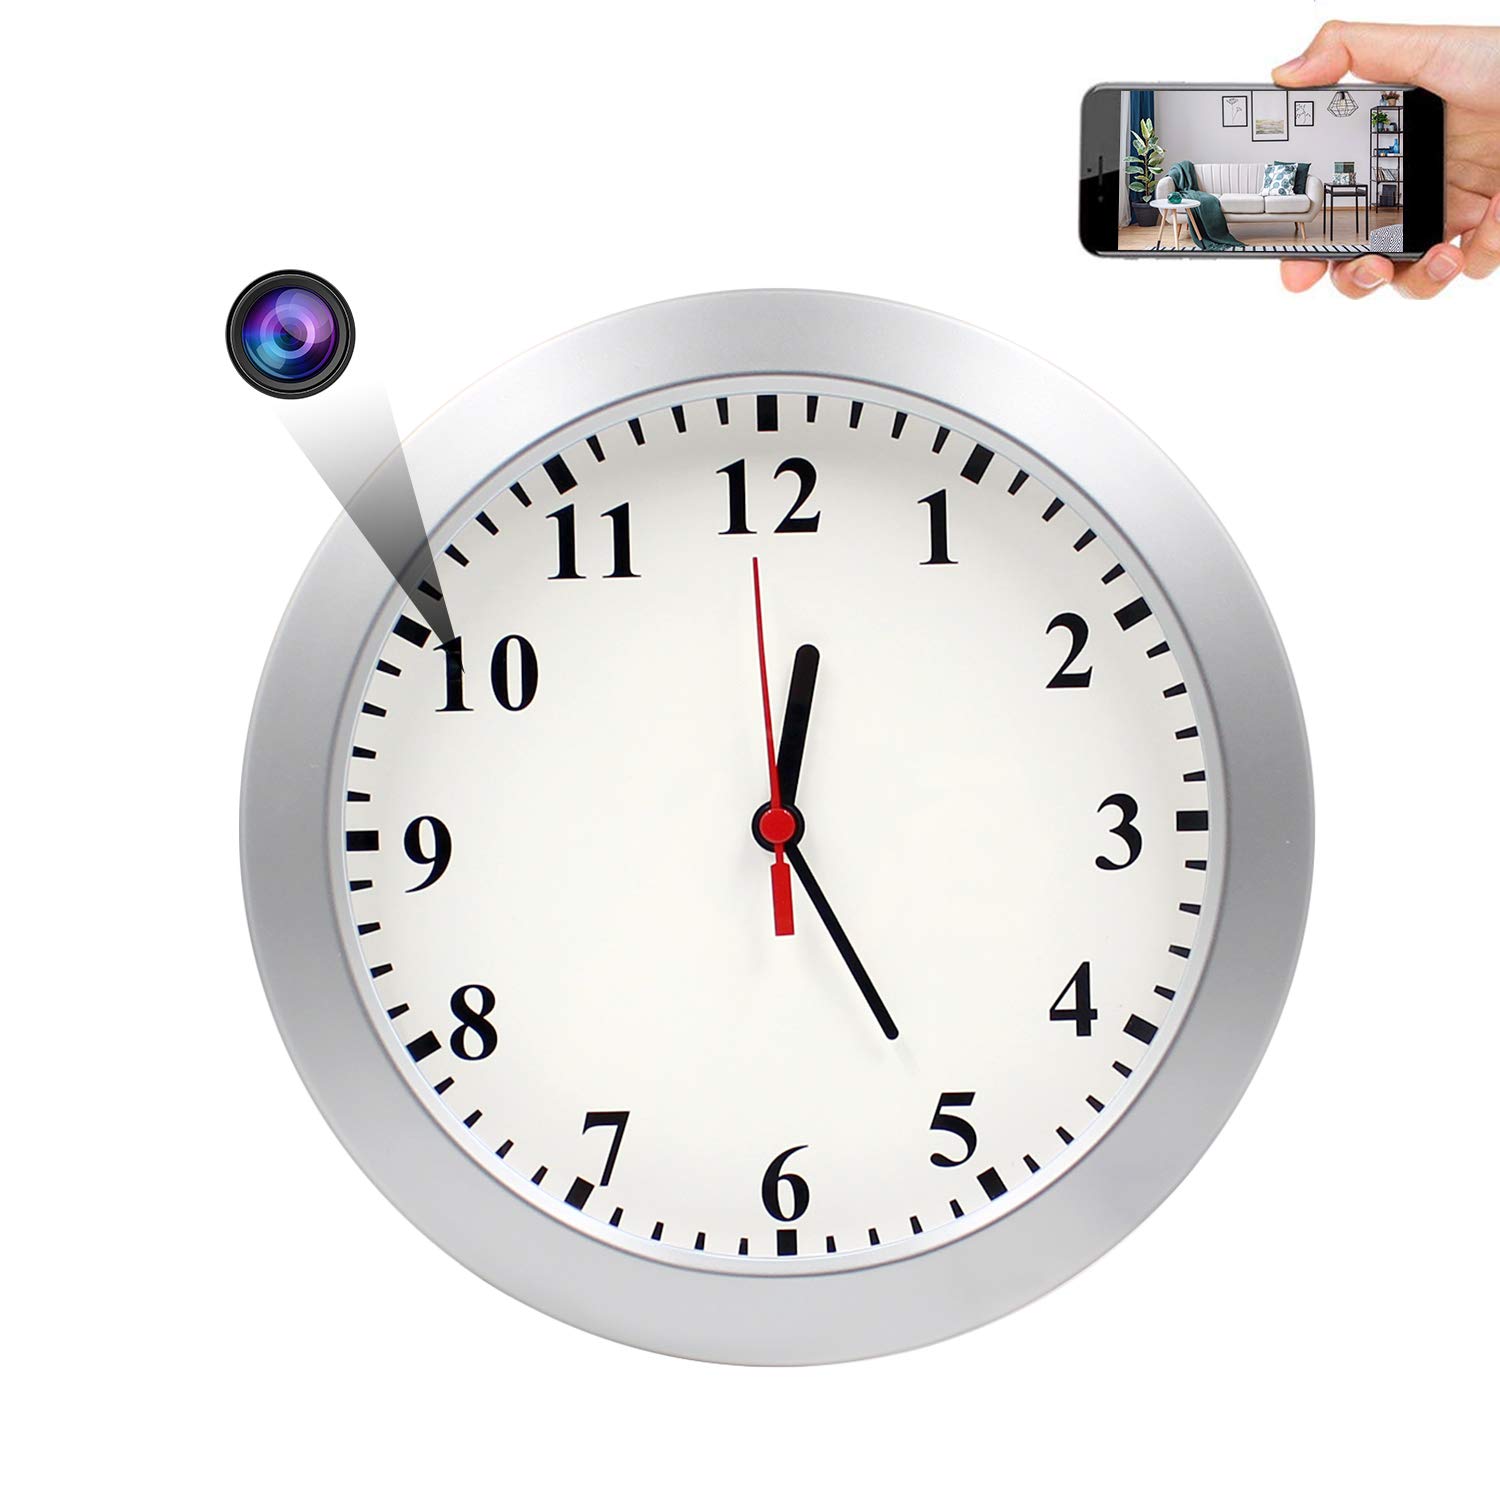 Book Cover AMCSXH Spy Hidden Wall Clock Camera, HD 1080P WiFi Camera Wall Clock, Security for Home and Office, Nanny Cam/Pet Cam/Wall Clock Cam, Remote-Real Time Video, Support iOS/Android, Video only